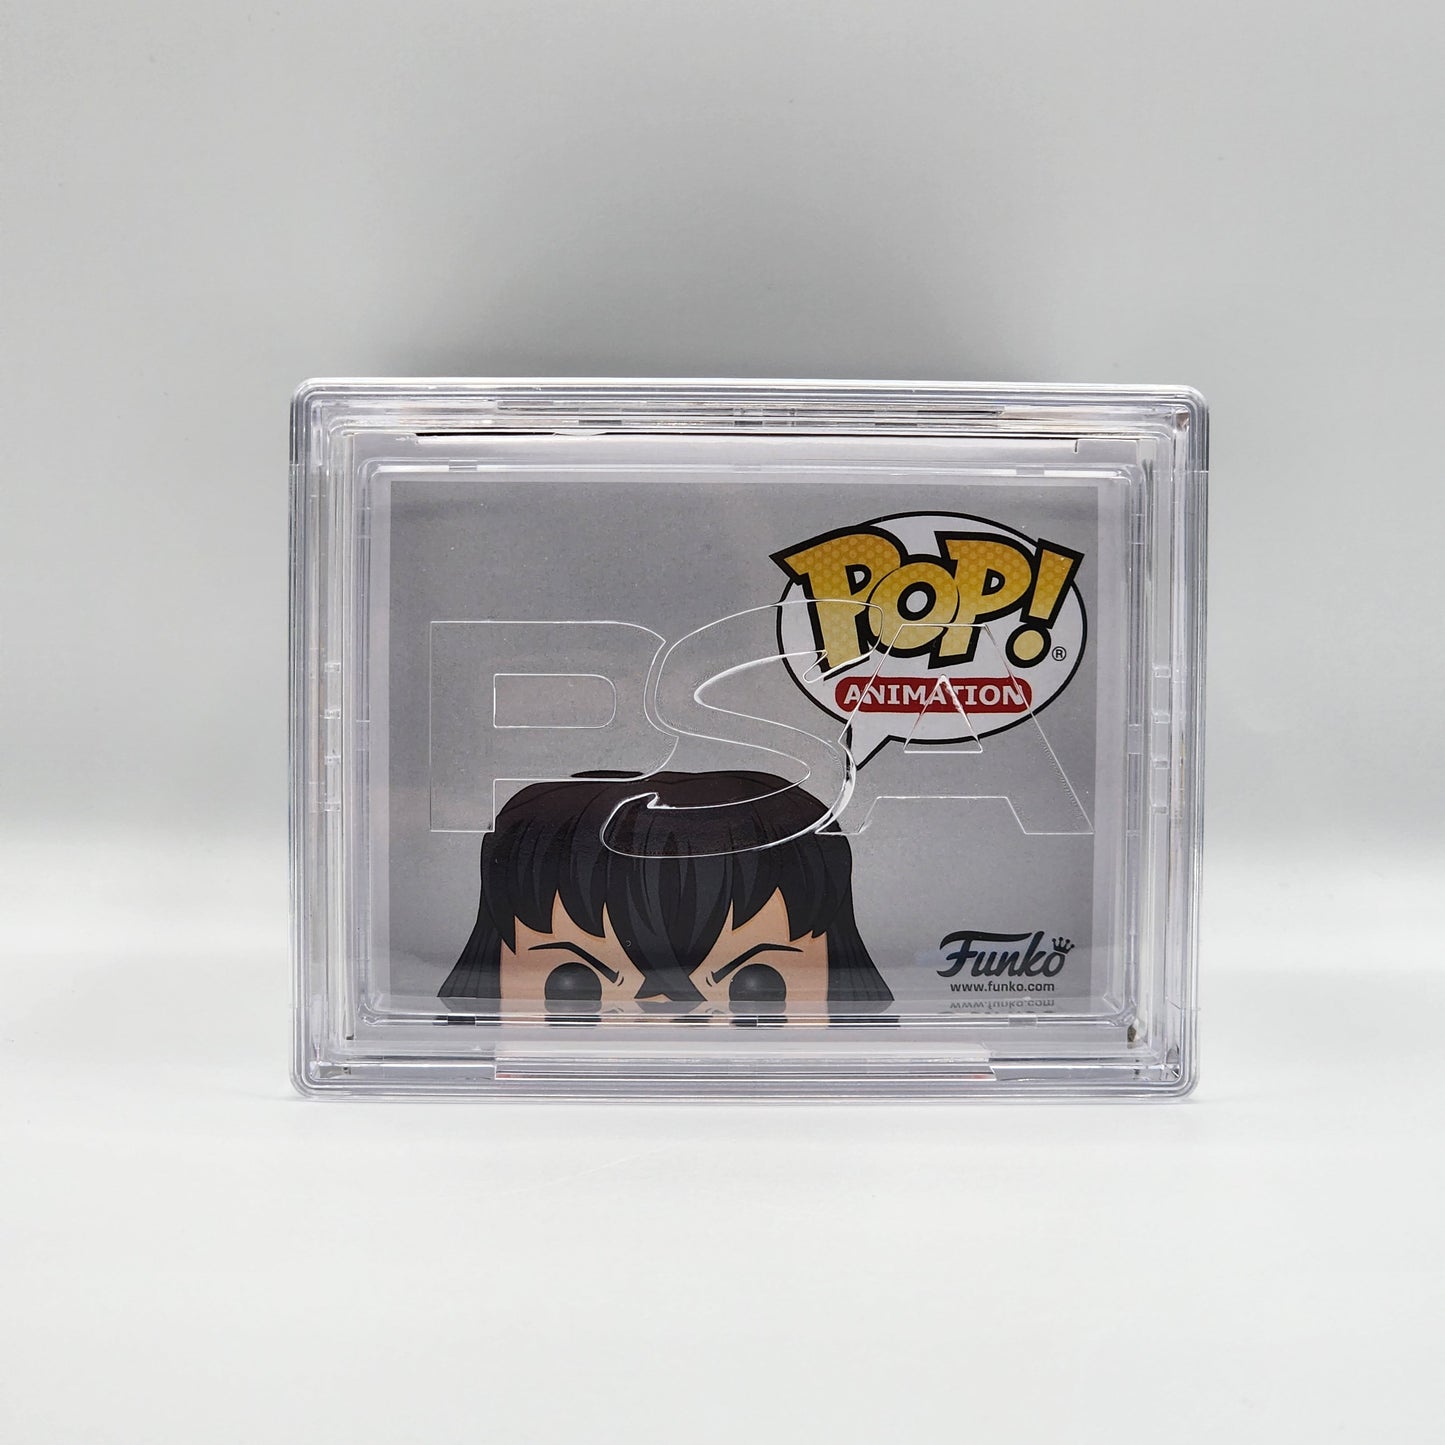 PSA ENCAPSULATED & SIGNATURE CERTIFIED - Funko POP! - DEMON SLAYER - INOSUKE HASHIBIRA - LIMITED EDITION FLOCKED CHASE - CHALICE COLLECTIBLES EXCLUSIVE (SIGNED BY BRYCE PAPENBROOK)